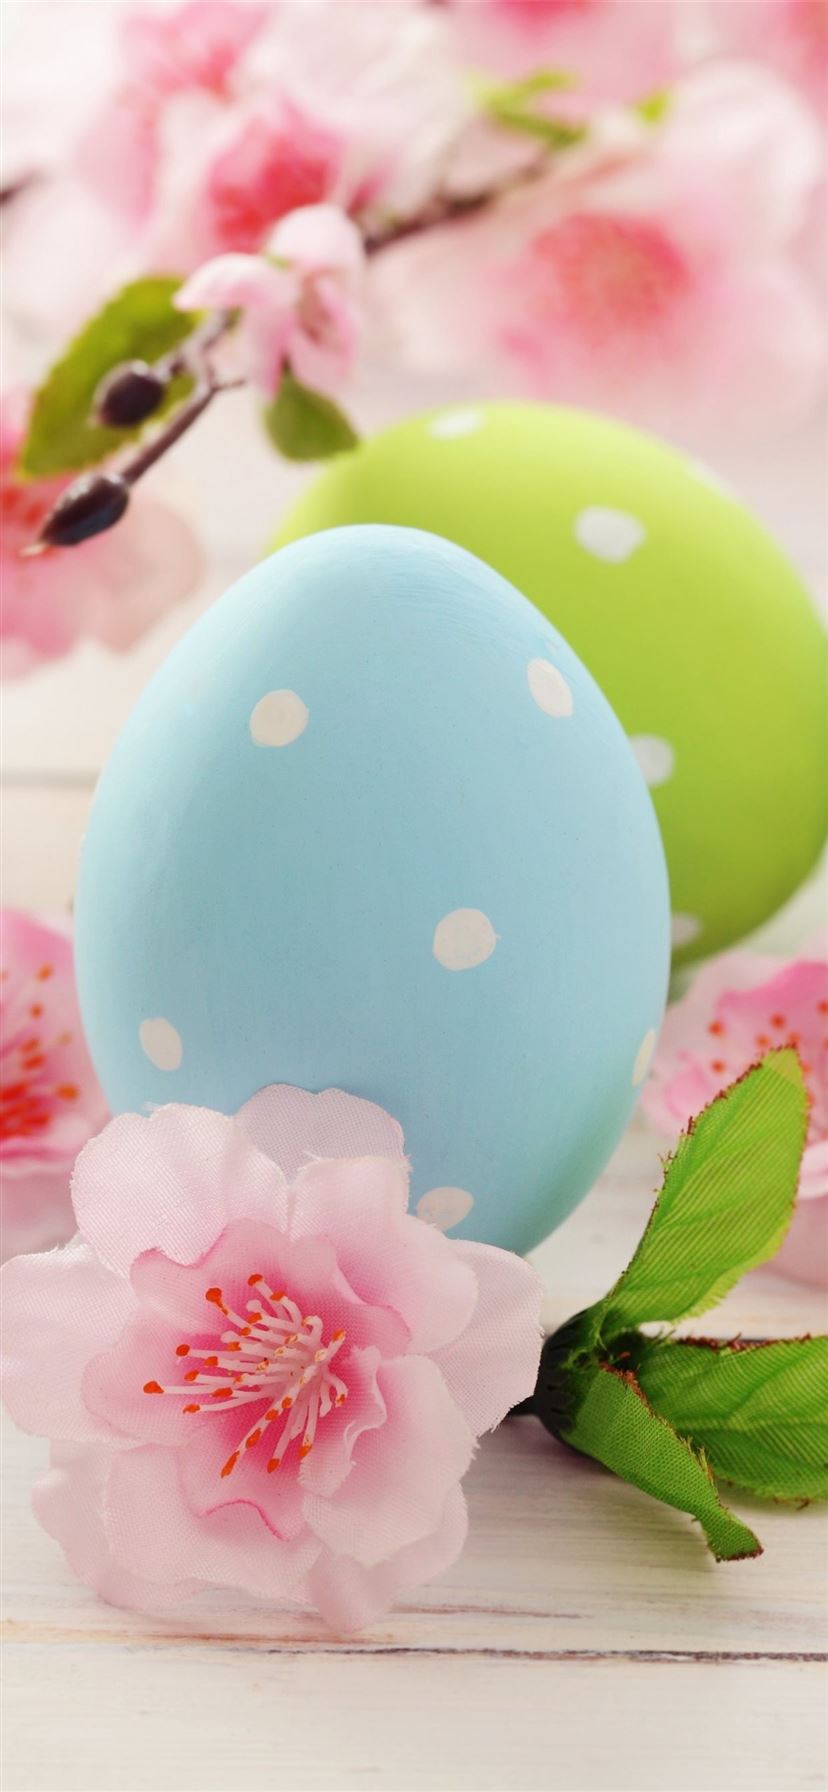 Easter eggs Flowers 5K Celebrations 5569 iPhone 11 Wallpapers Free Download